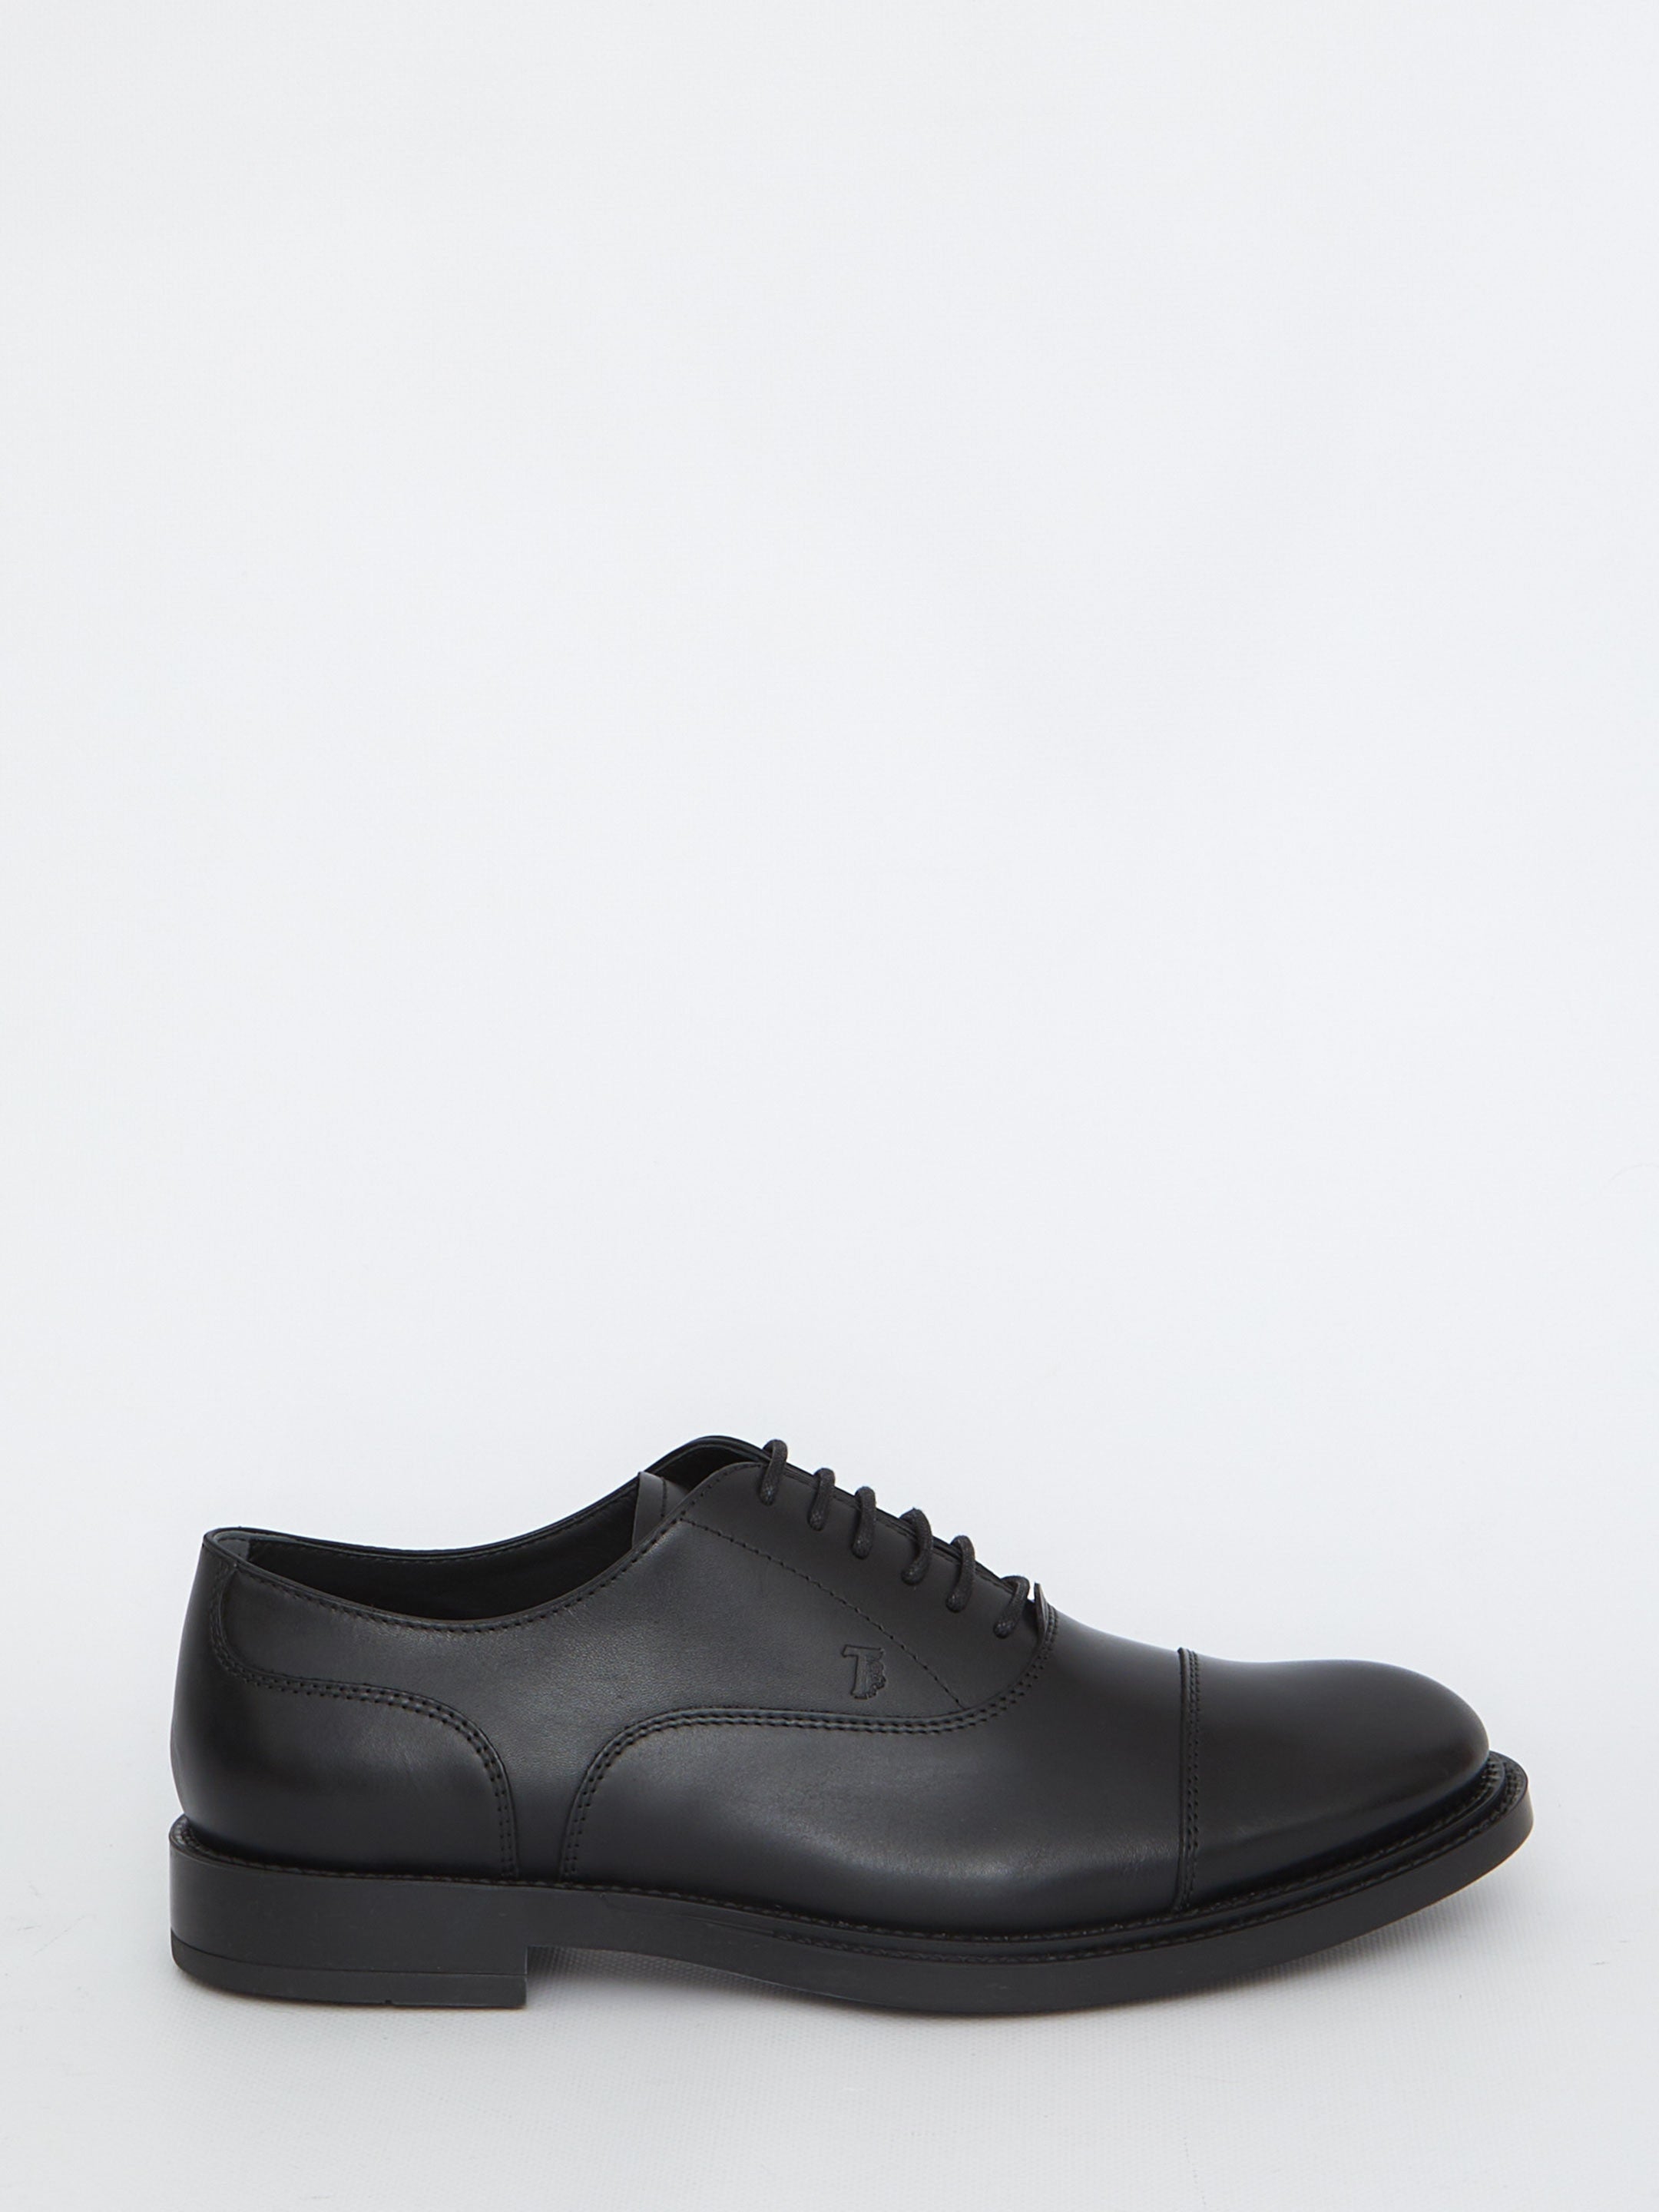 Lace-ups in black leather